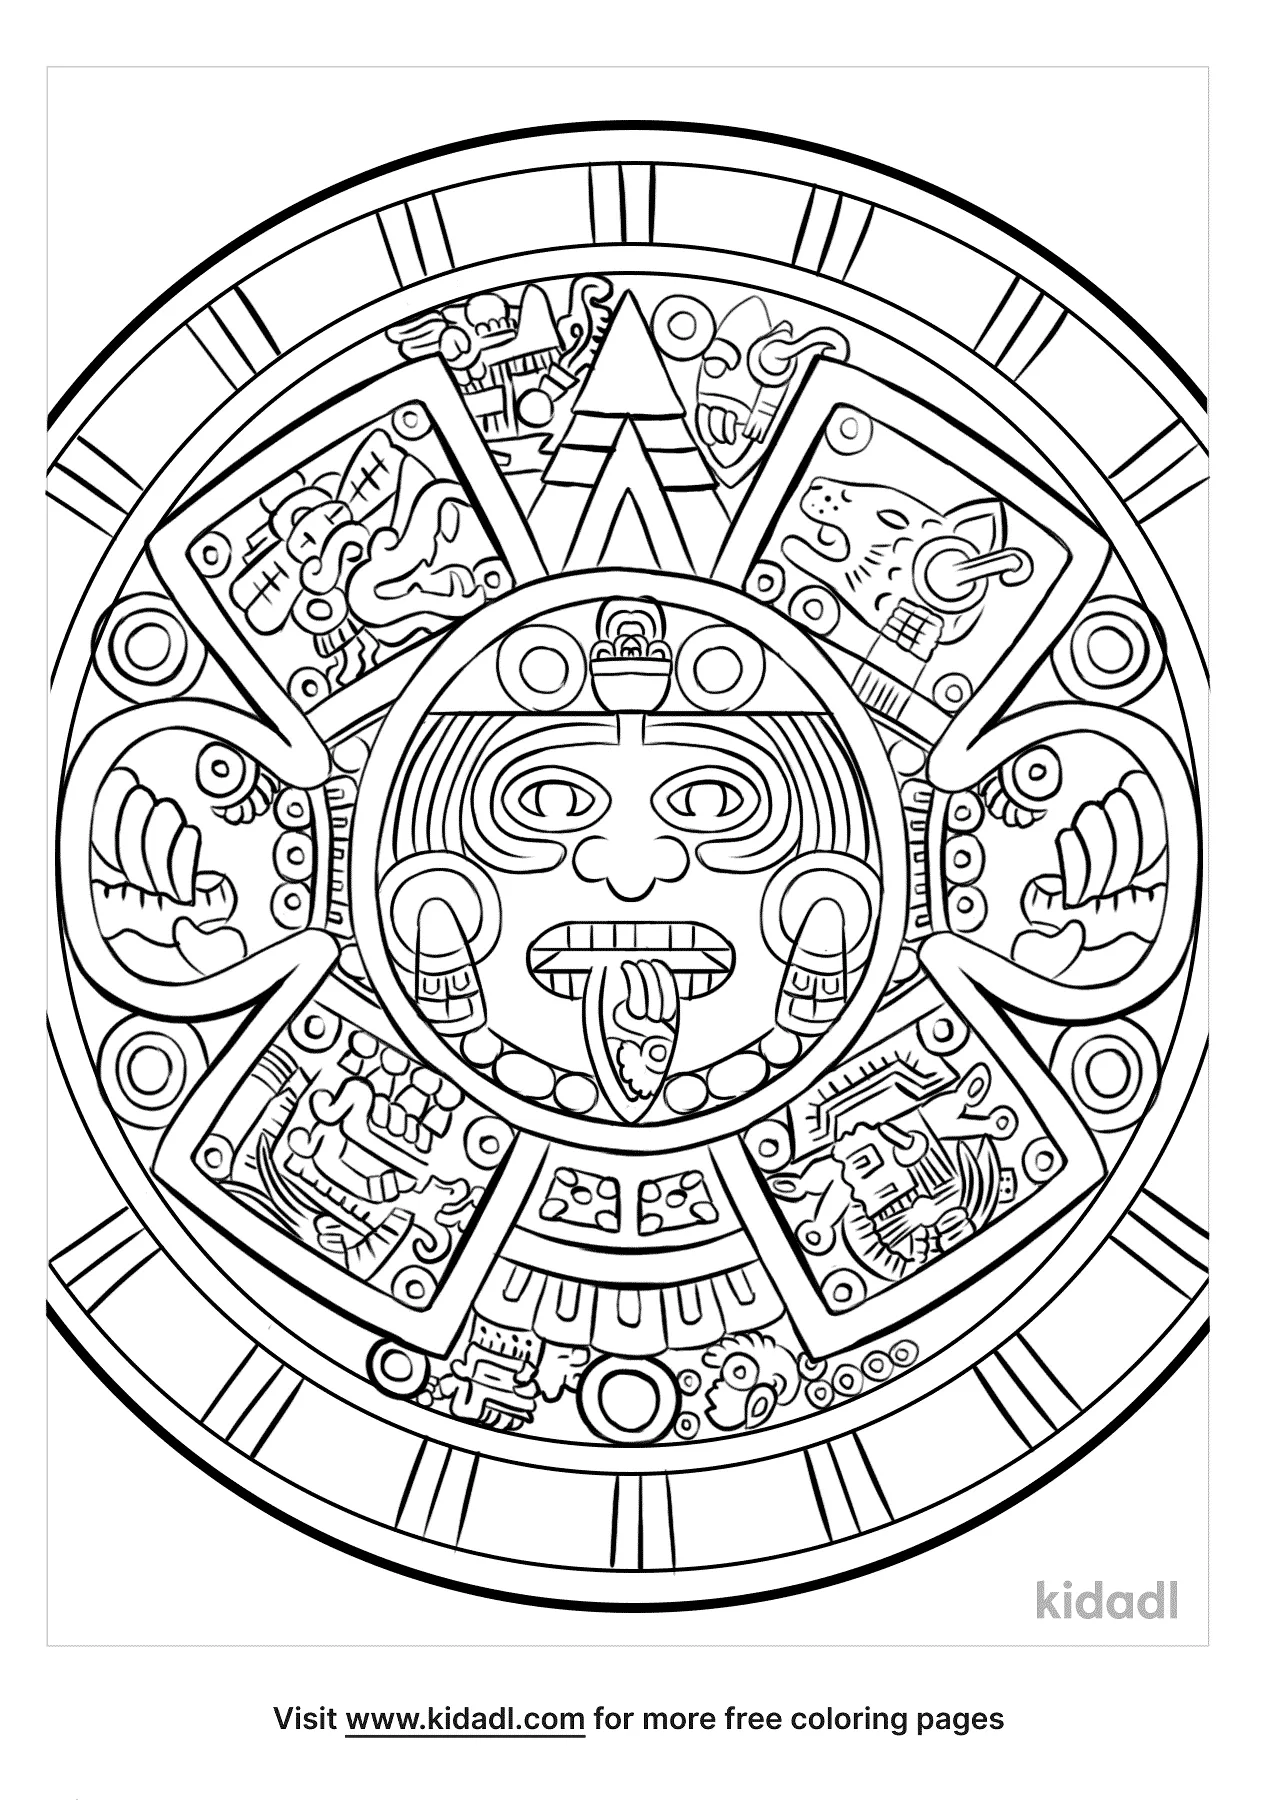  Aztec Calendar Coloring Page 17 Aztecs Coloring Pages Free Printable Coloring Pages Don t